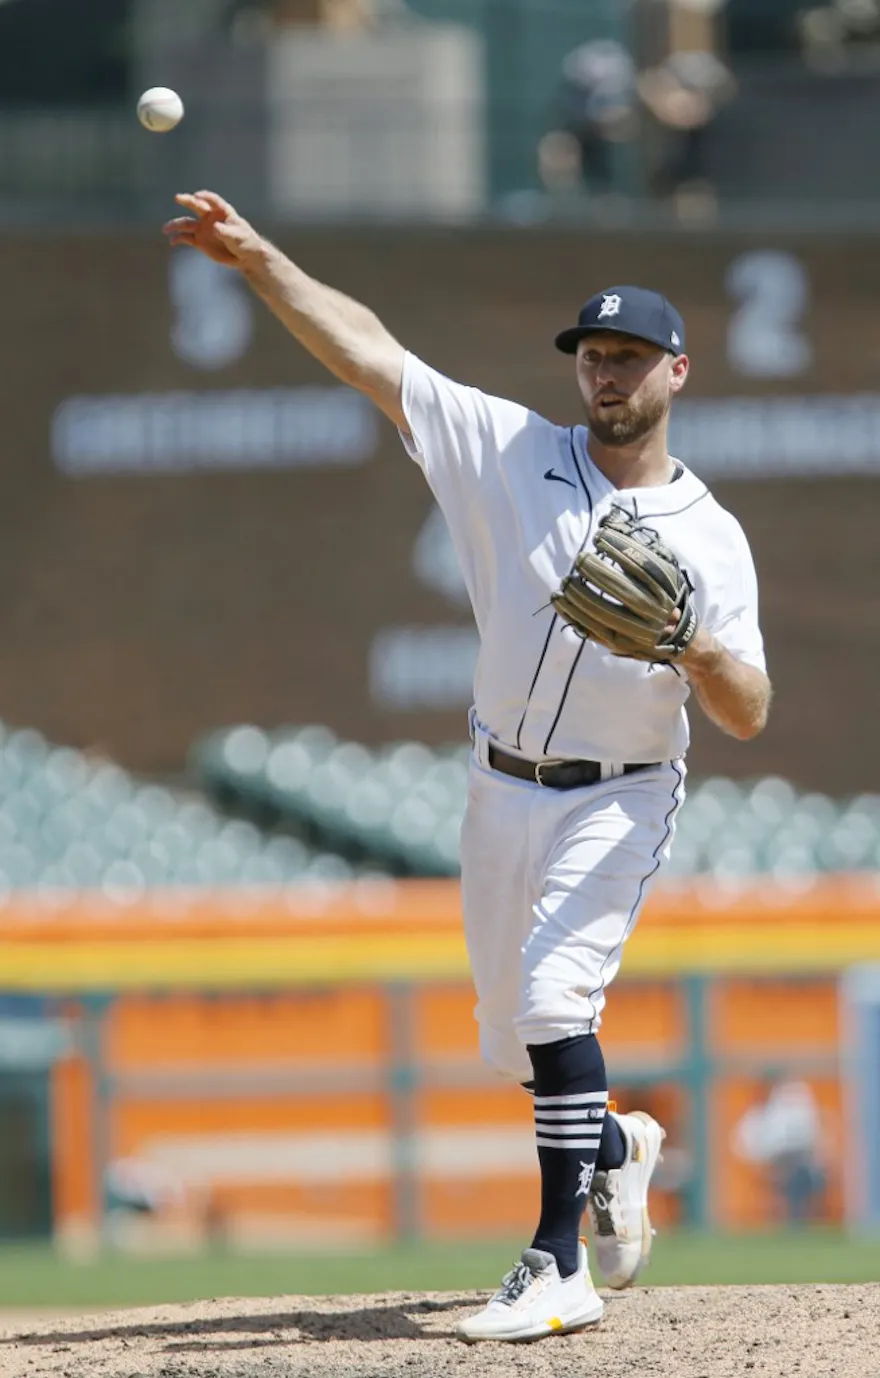 Son of Roger Clemens called up to majors by Detroit Tigers